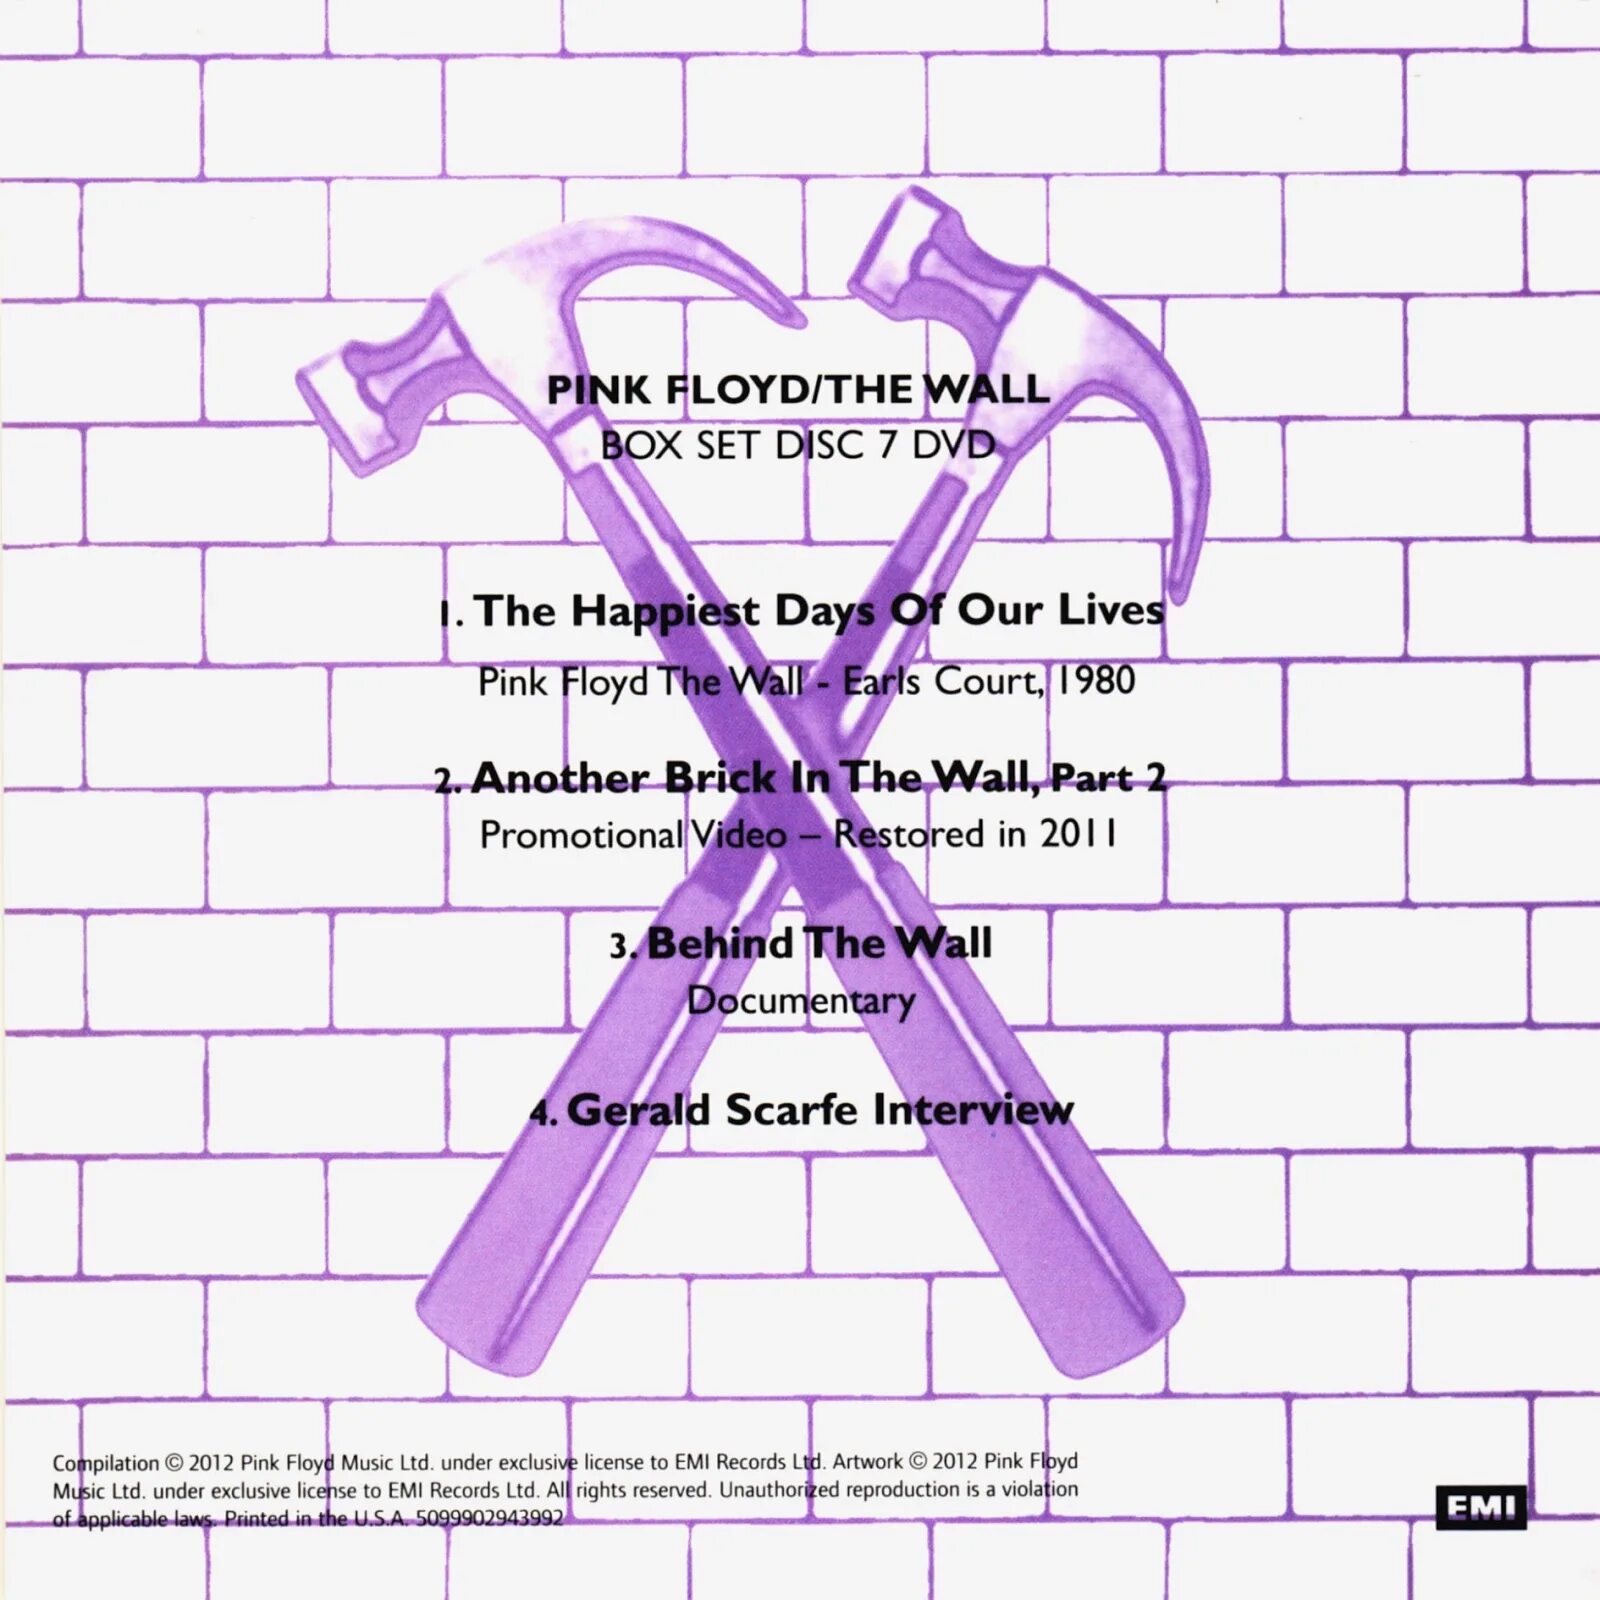 Pink Floyd. The Wall. Pink Floyd 1979 the Wall. Обложка CD Pink Floyd the Wall. Pink Floyd the Happiest Days of our Lives. Стен перевод песни